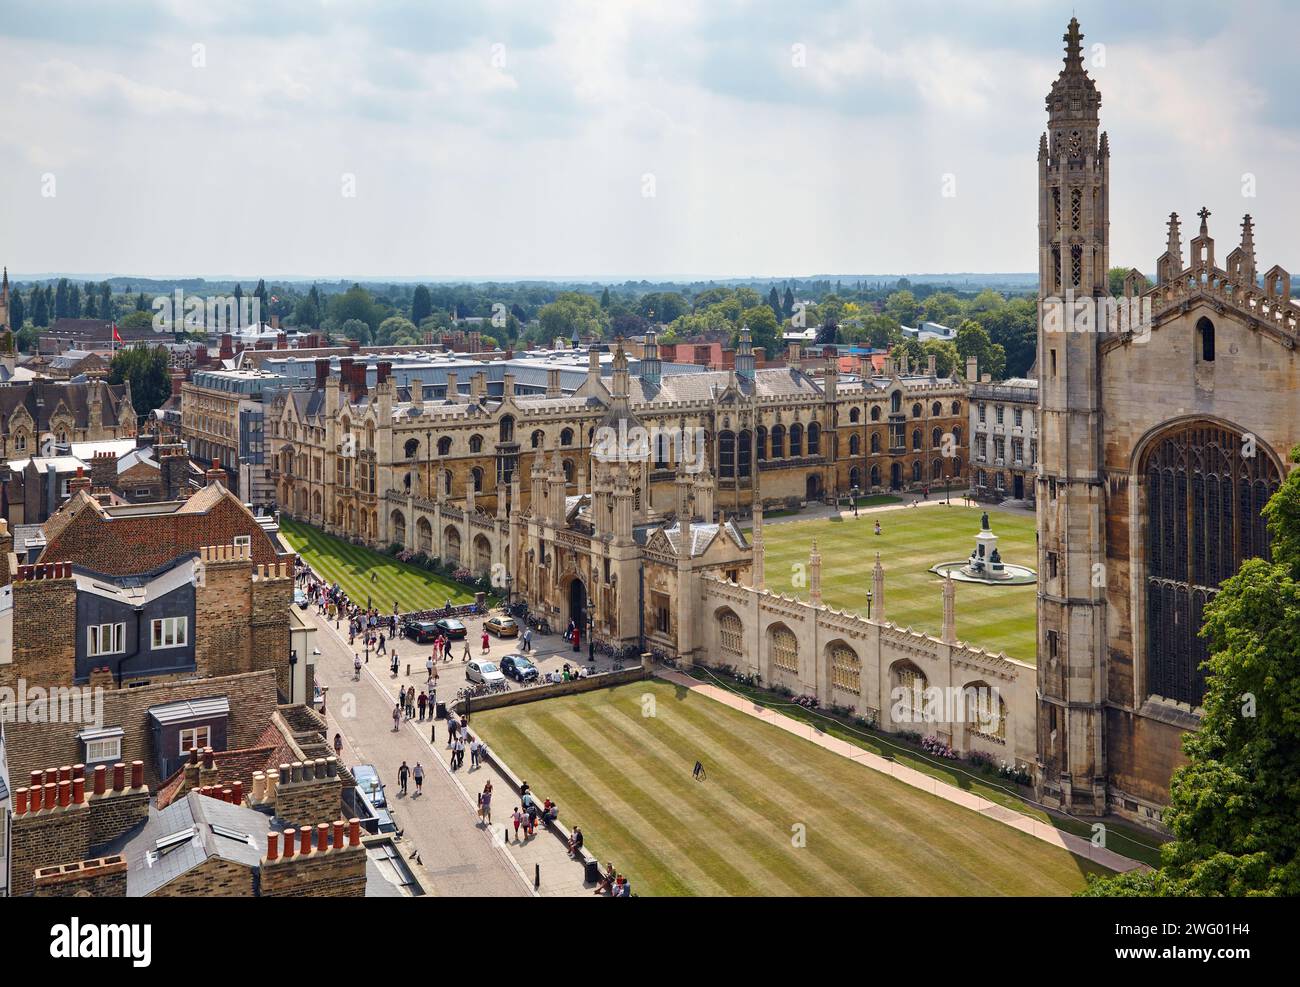 Cambridge, United Kingdom - June 26, 2010: The view of the King's parade, chapel and the front court of King’s College from the tower of St Mary the G Stock Photo